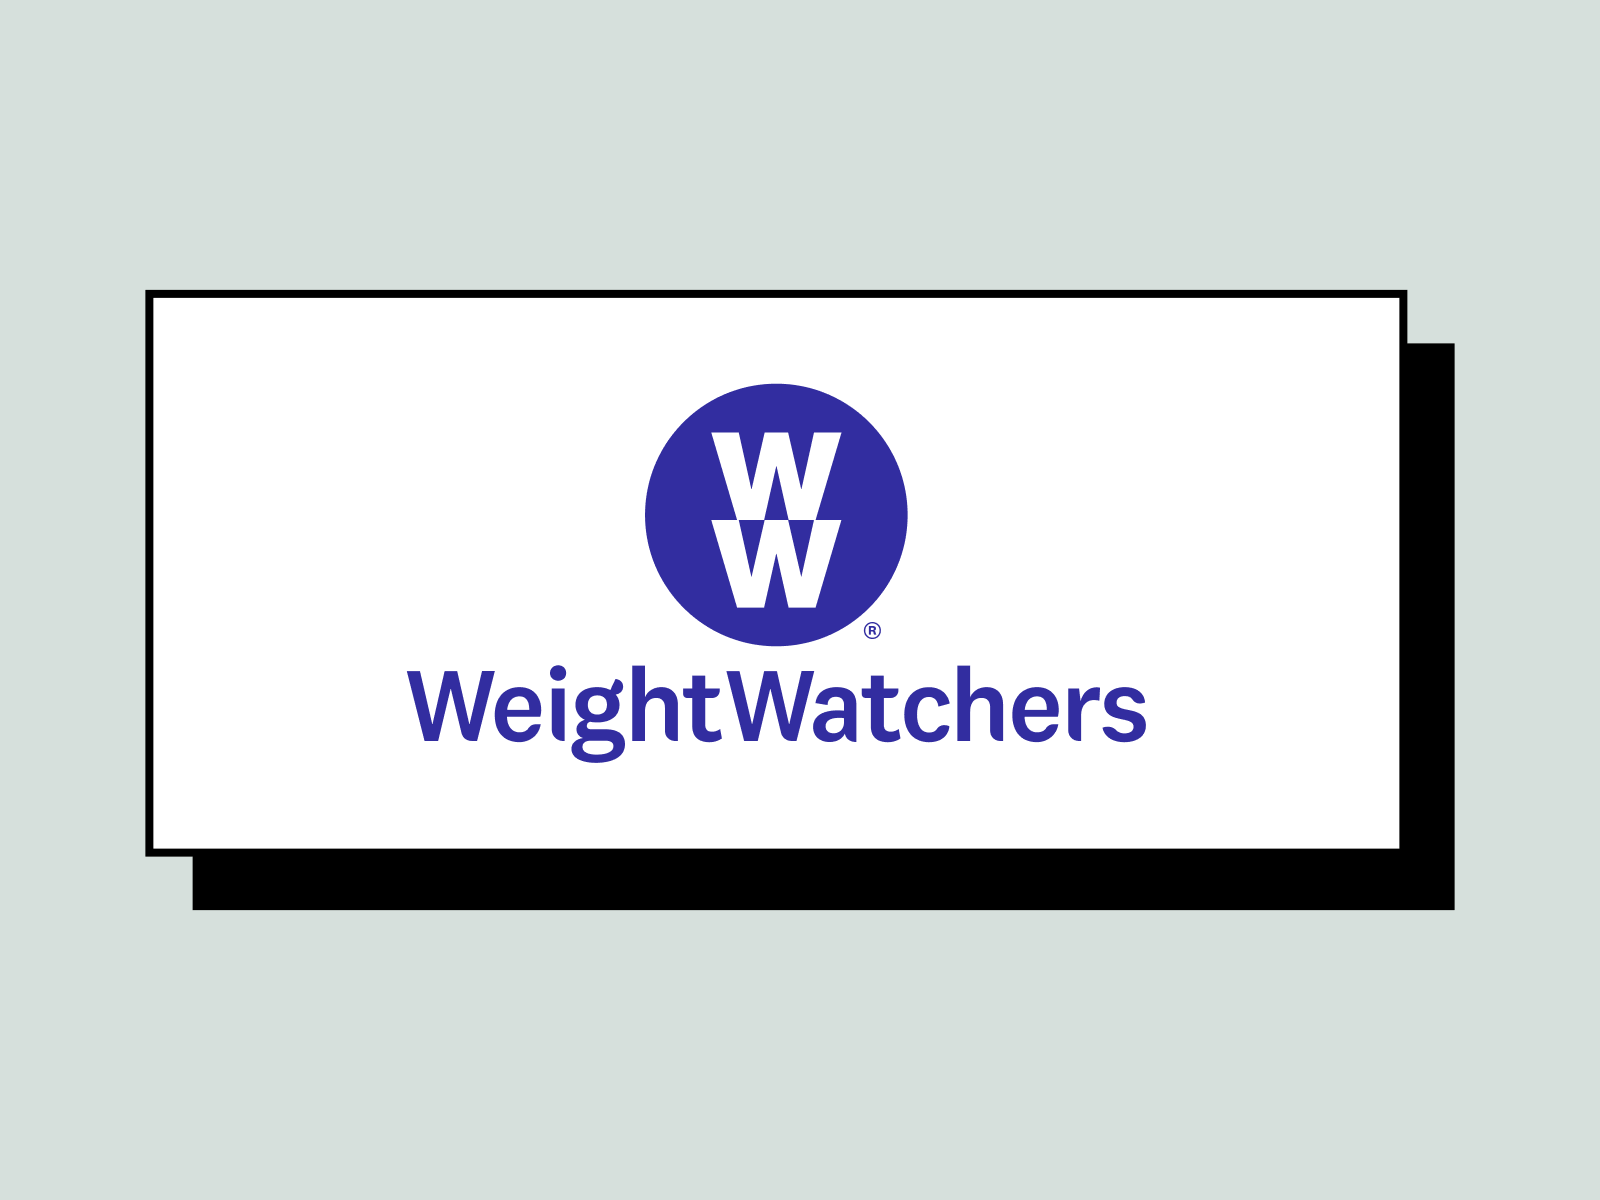 WeightWatchers UX Accessibility Case Study